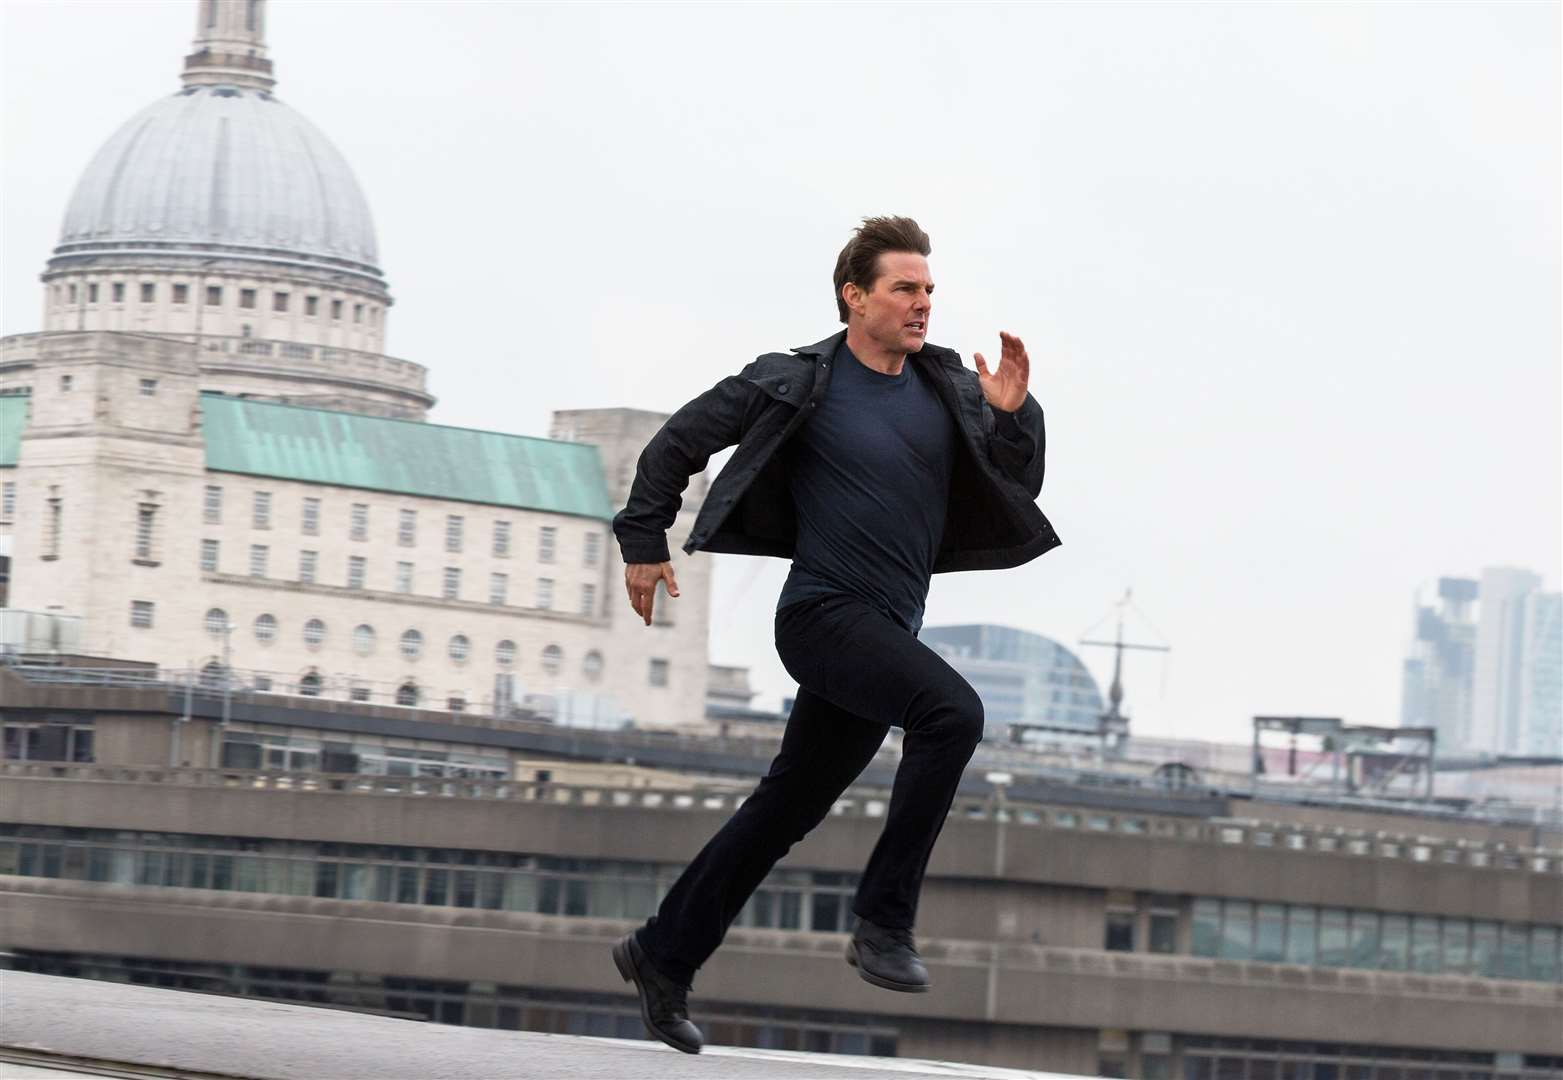 Tom Cruise was recently in Chatham filming the latest instalment of the Mission Impossible movies. Picture: Paramount Pictures/Skydance